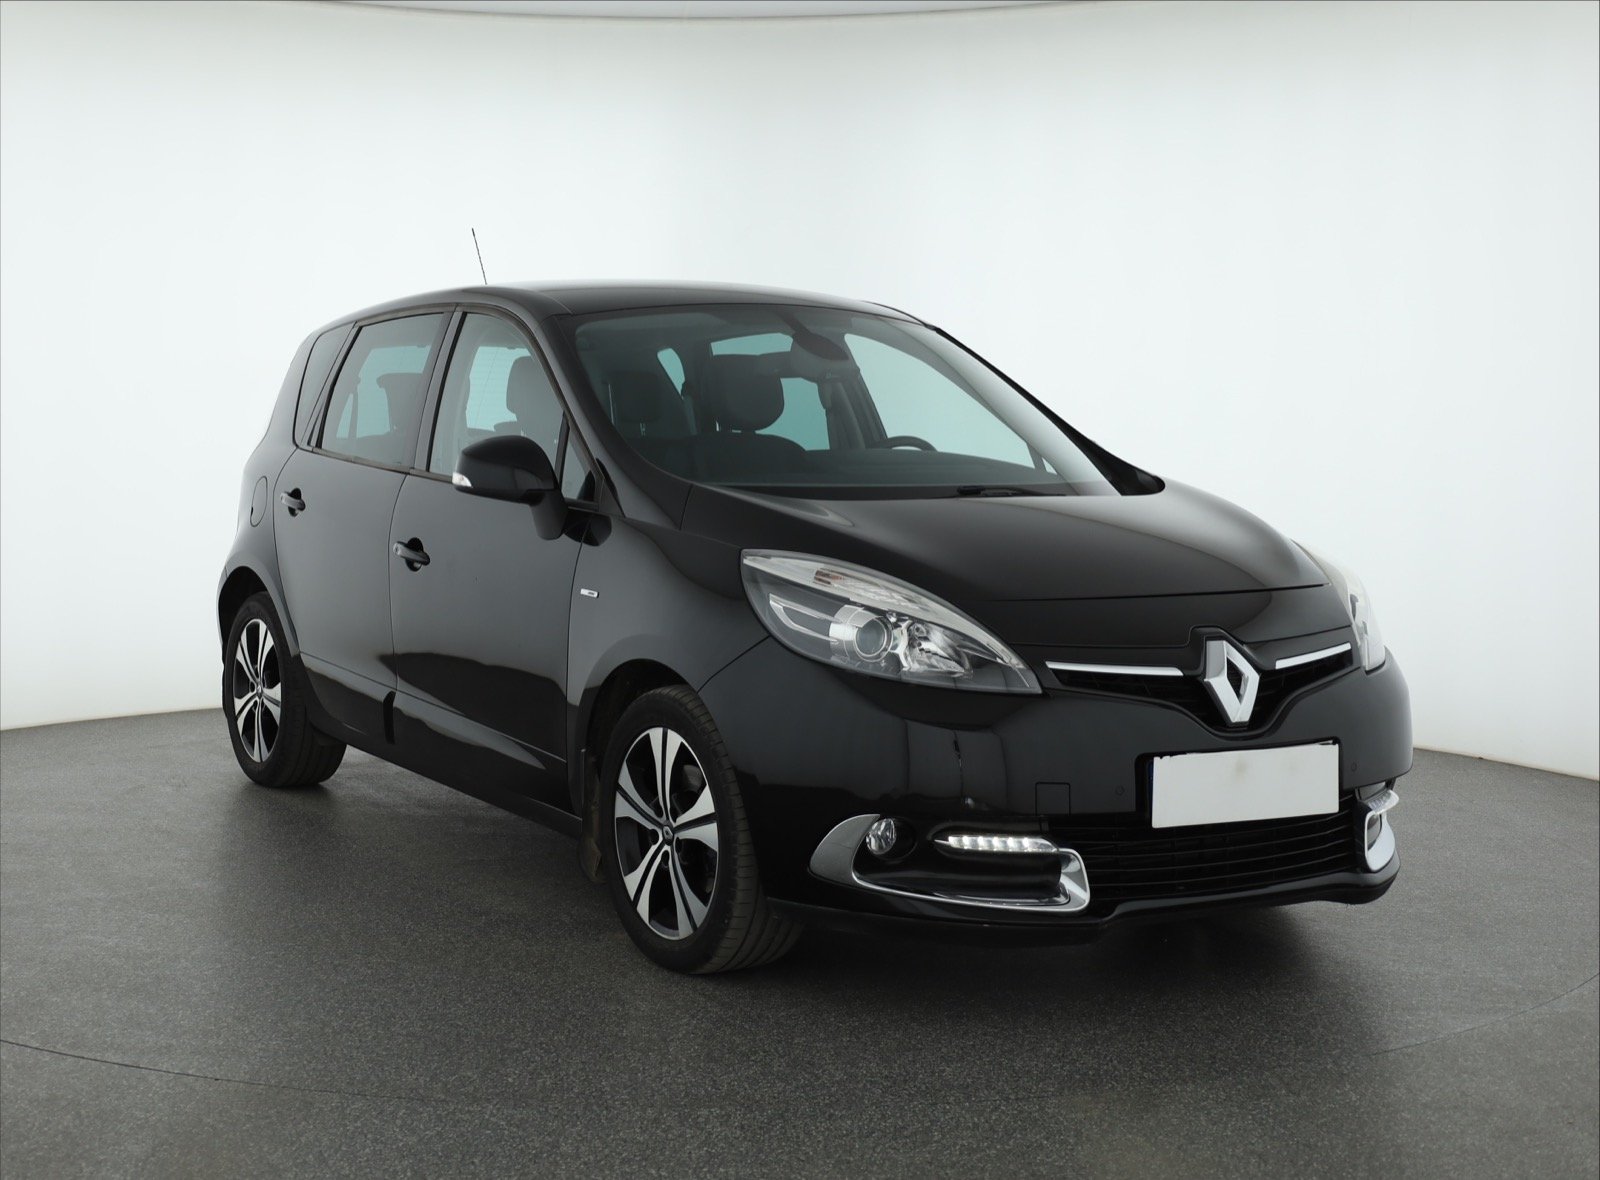 Renault Scenic 1.2 TCe SUV 2013 - 1